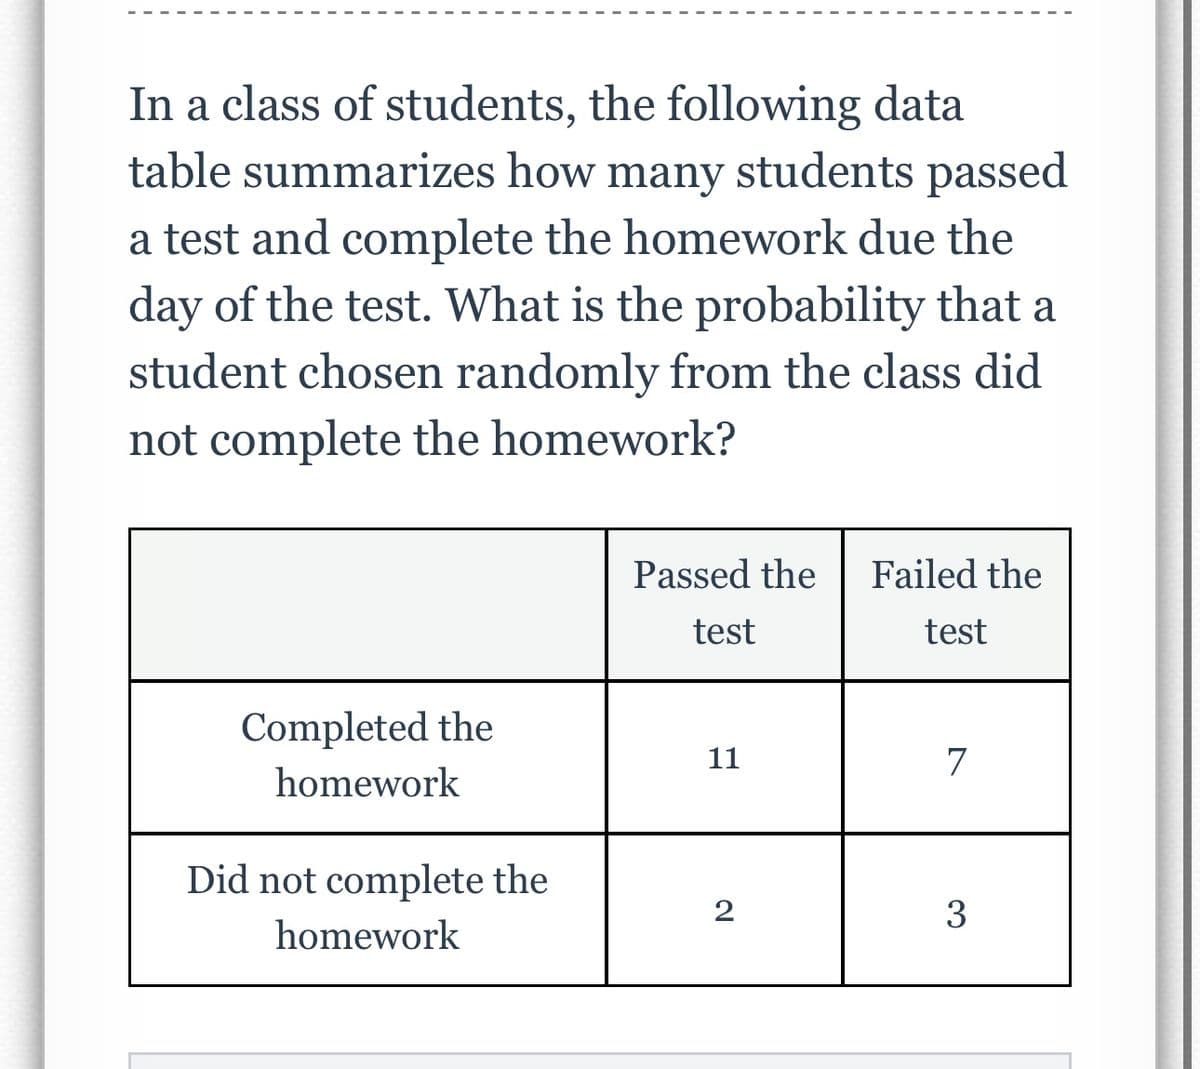 In a class of students, the following data
table summarizes how many students passed
a test and complete the homework due the
day of the test. What is the probability that a
student chosen randomly from the class did
not complete the homework?
Completed the
homework
Did not complete the
homework
Passed the Failed the
test
test
11
2
7
3